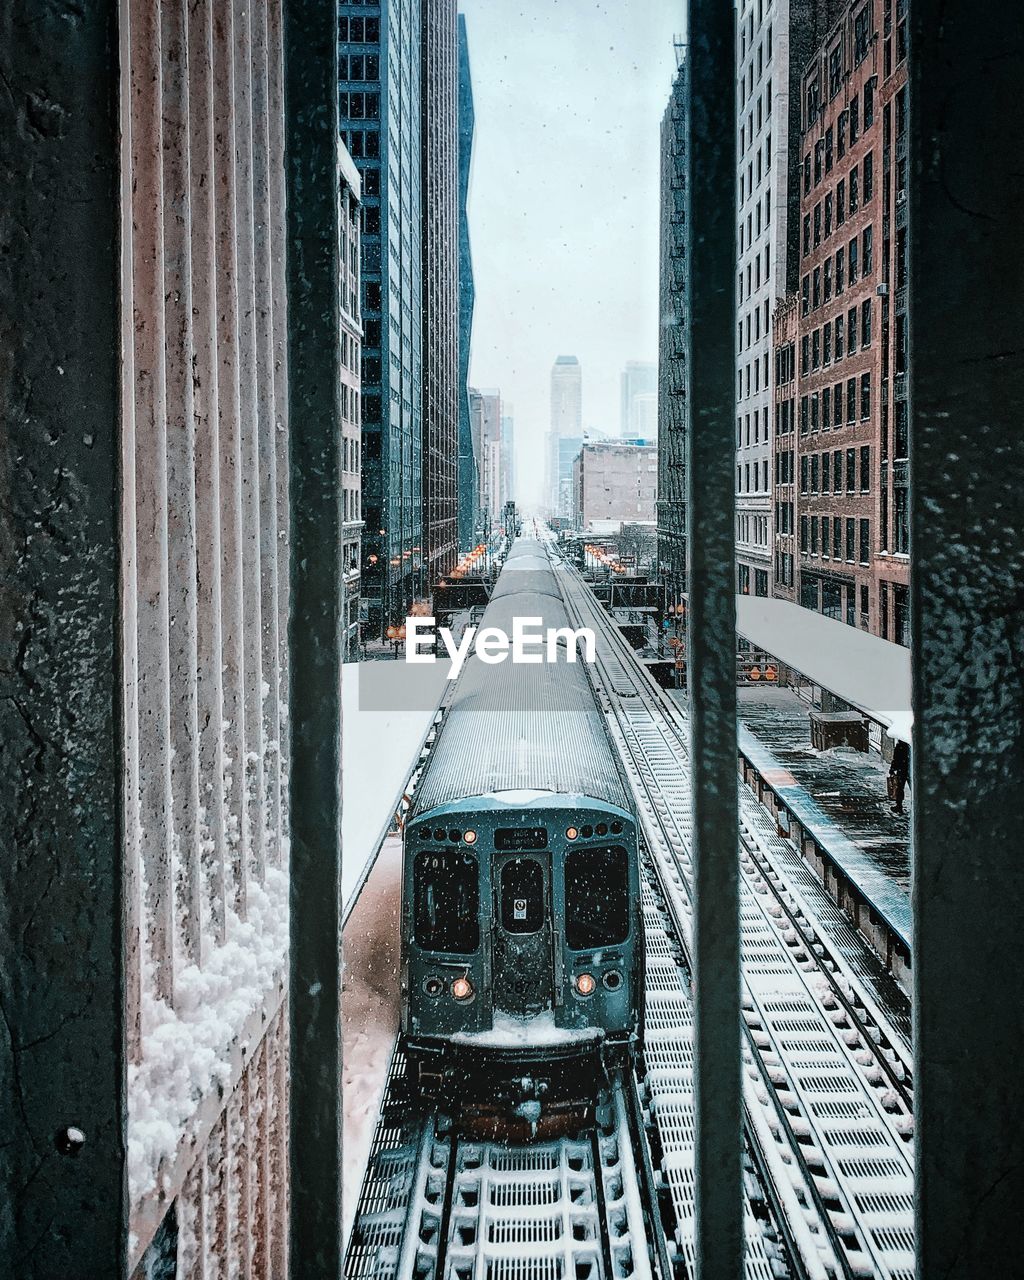 RAILROAD TRACKS AMIDST BUILDINGS DURING WINTER